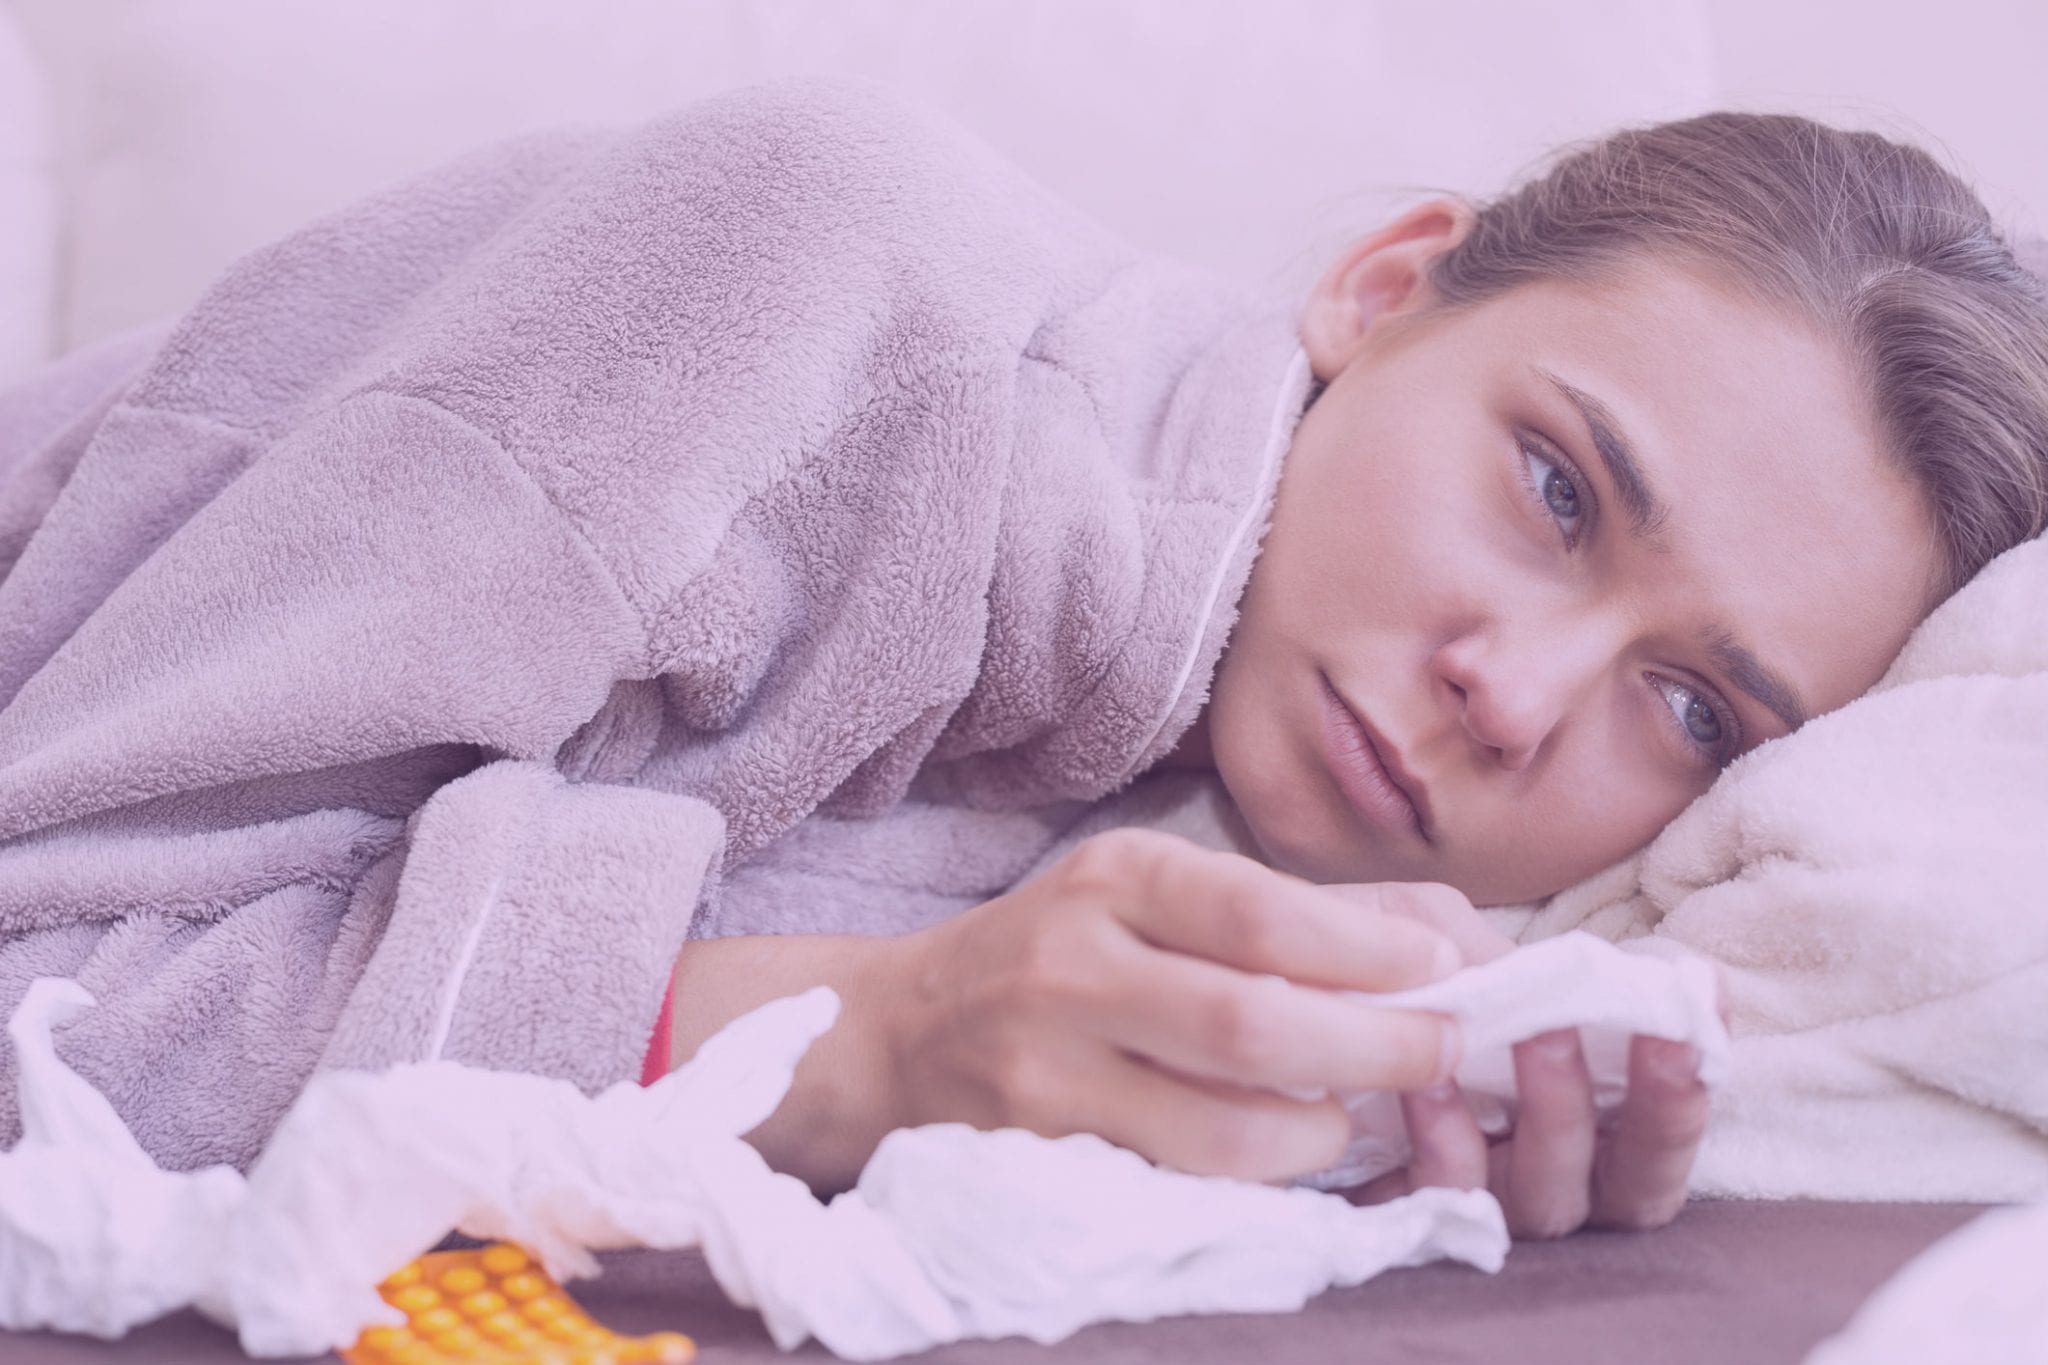 Go to Bed with Wet Hair and Catch a Cold? | MedPost